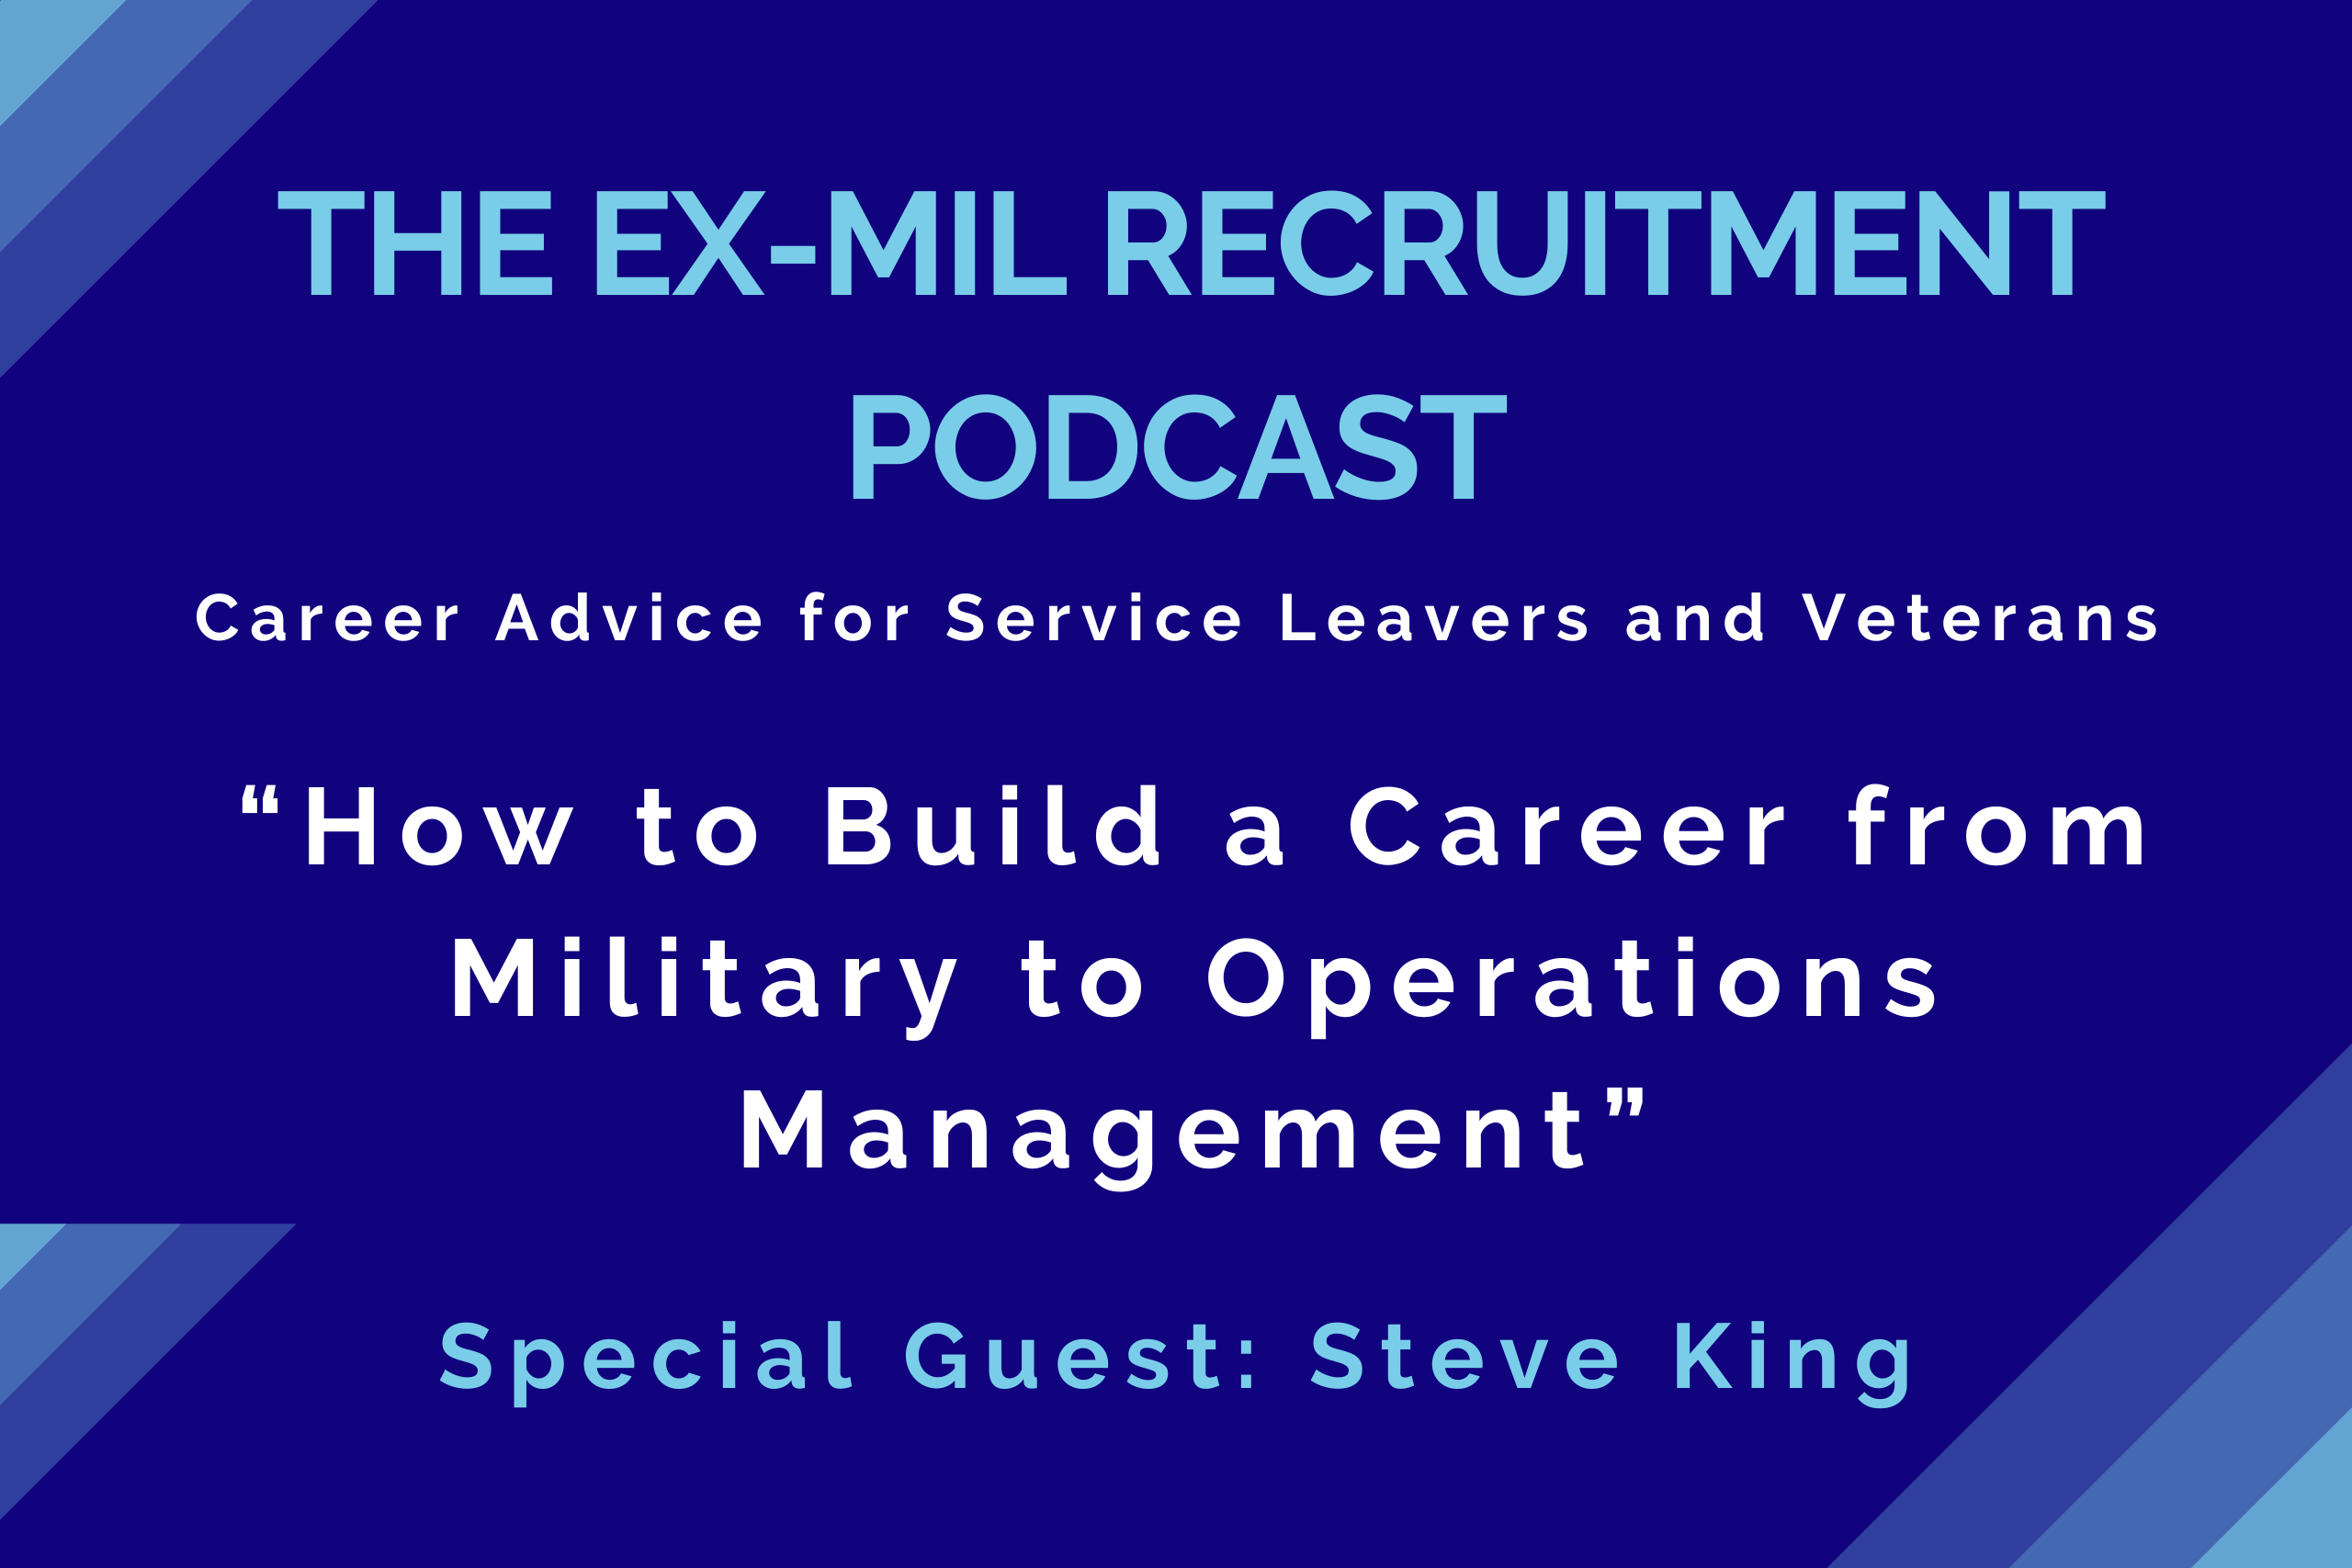 Episode 33 – “How to Build a Career from Military to Operations Management” with Steve King